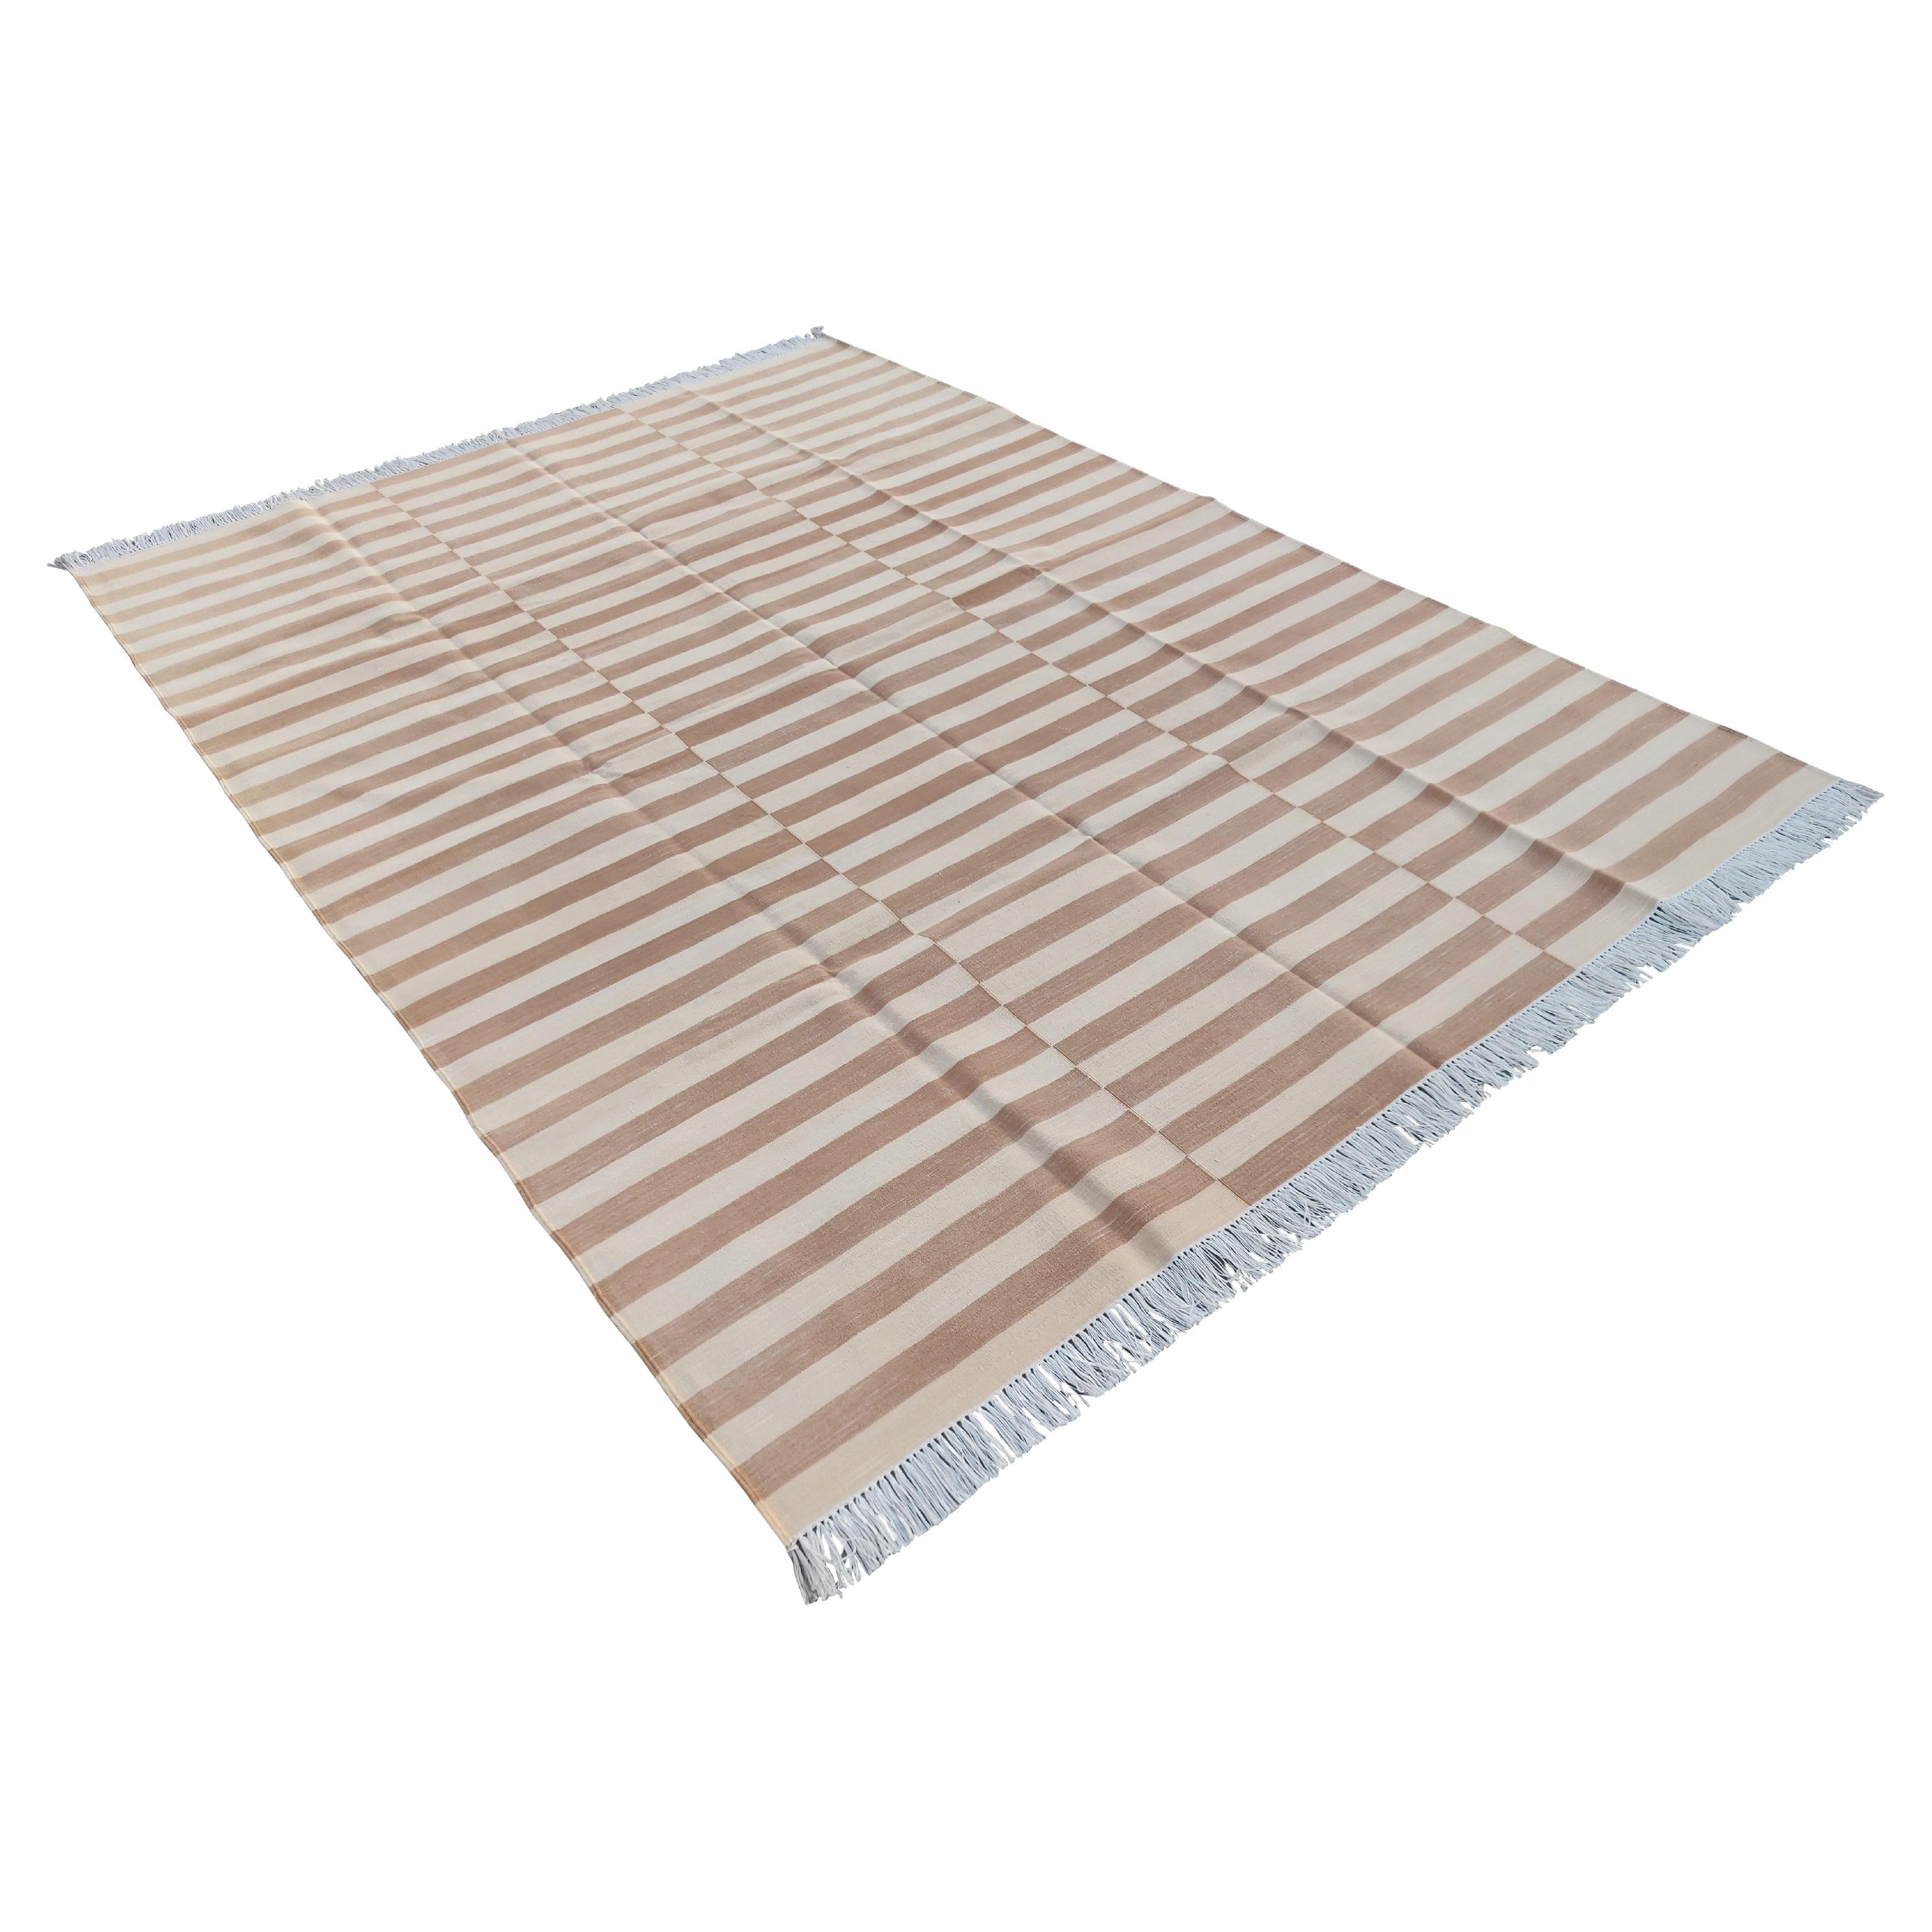 Handmade Cotton Area Flat Weave Rug, 6x9 Tan And Cream Striped Indian Dhurrie For Sale